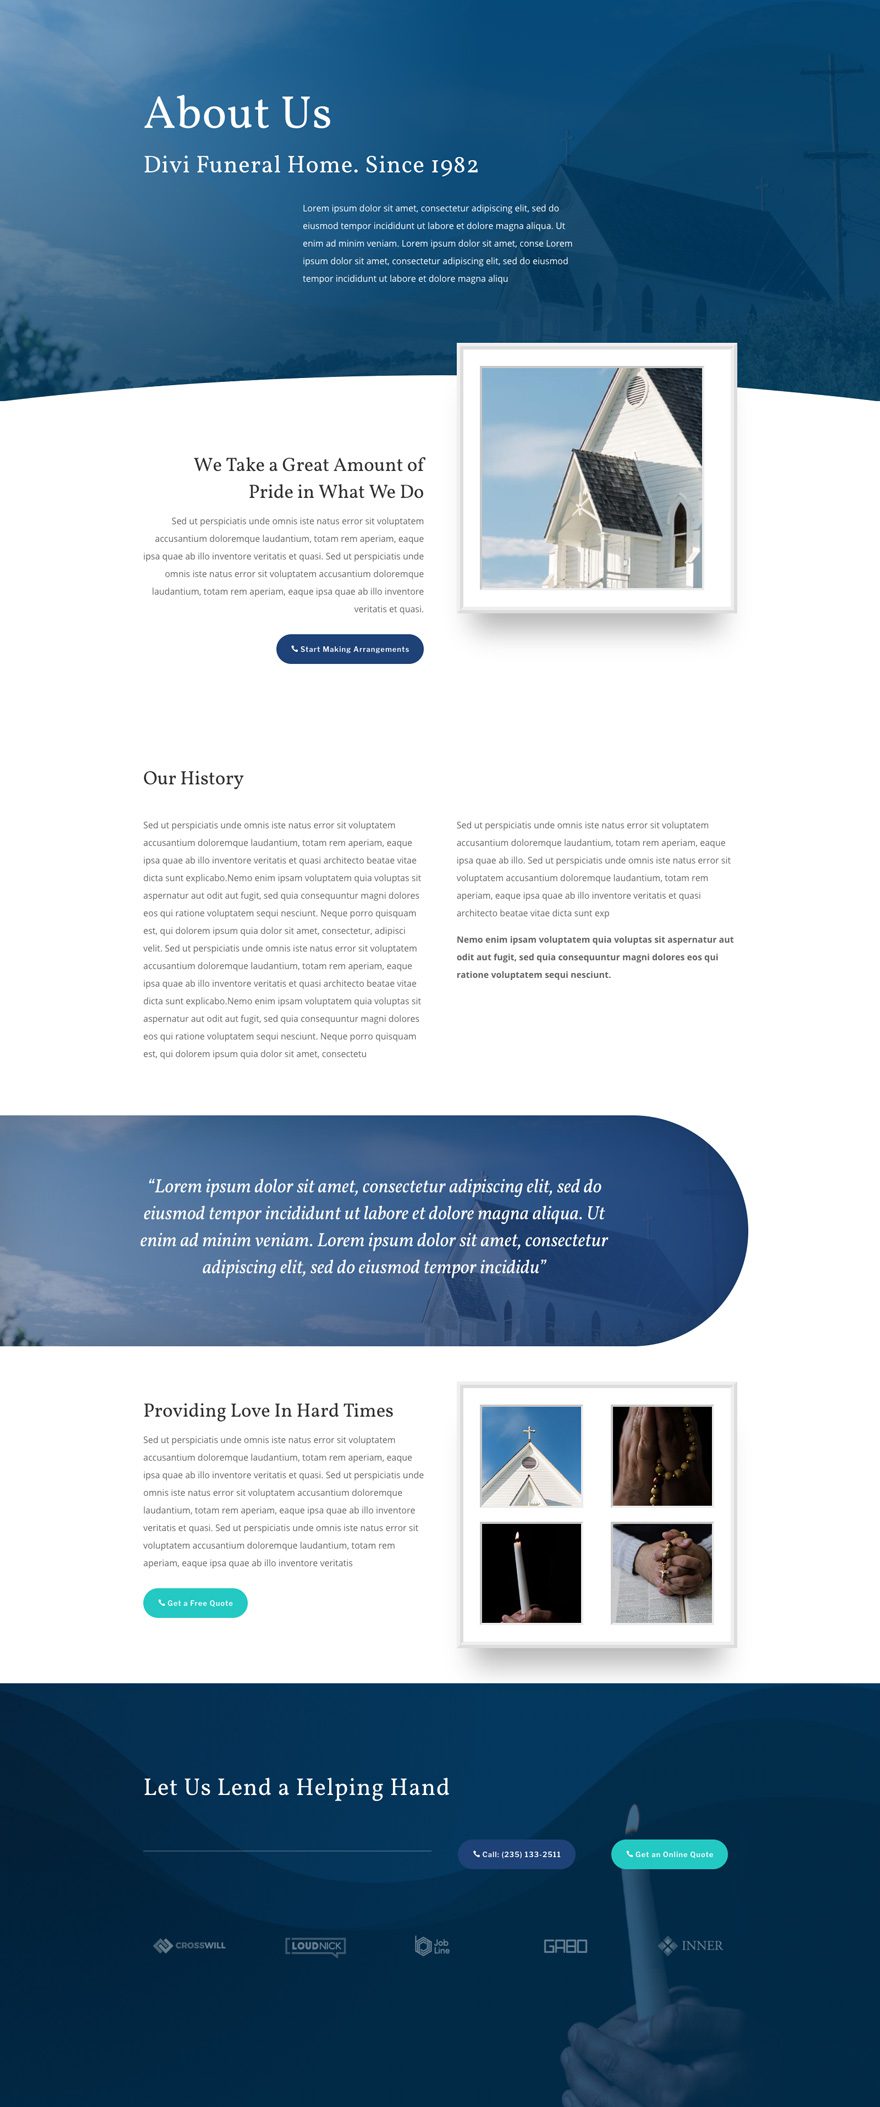 divi funeral home layout